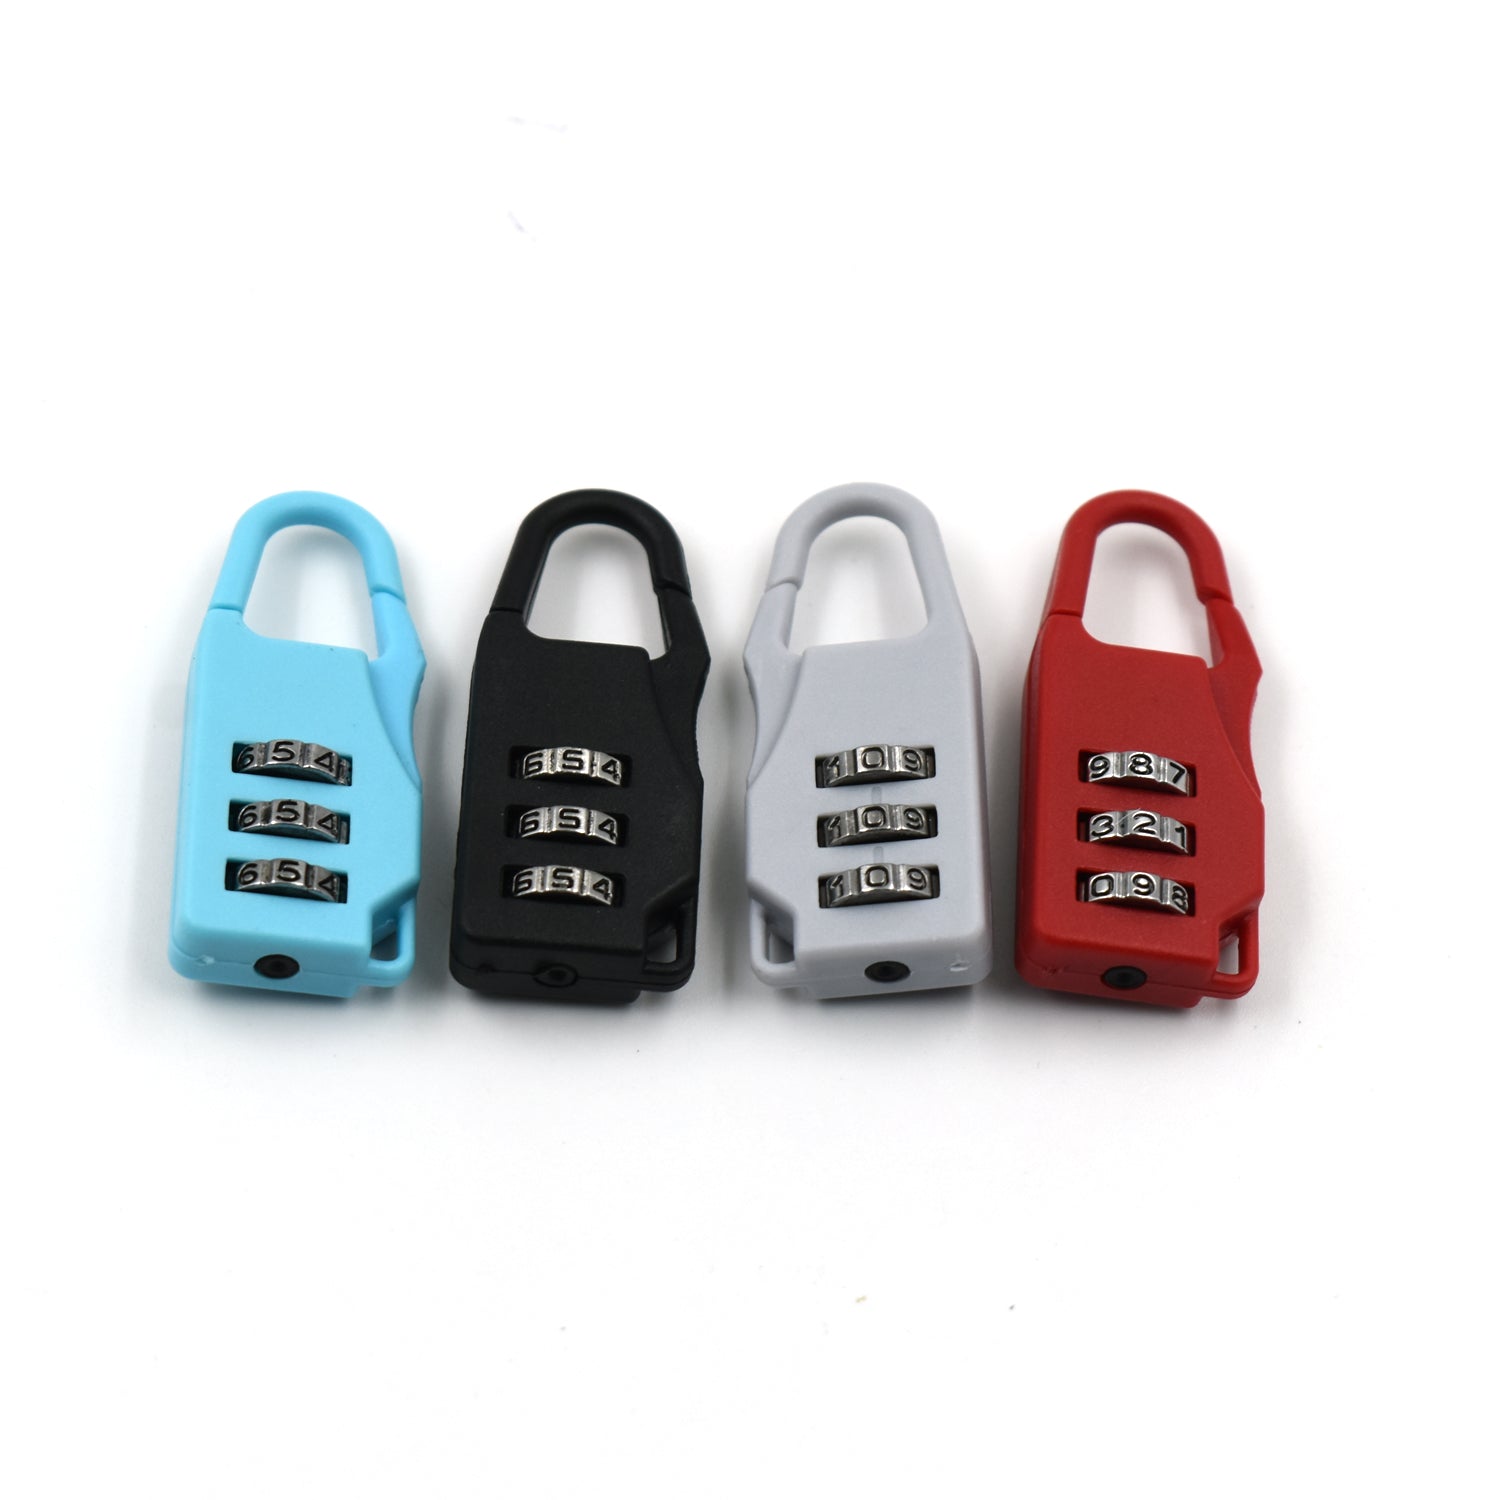 6109 3 Digit luggage Lock and tool used widely in all security purposes of luggage items and materials. - China, 0.015 kgs